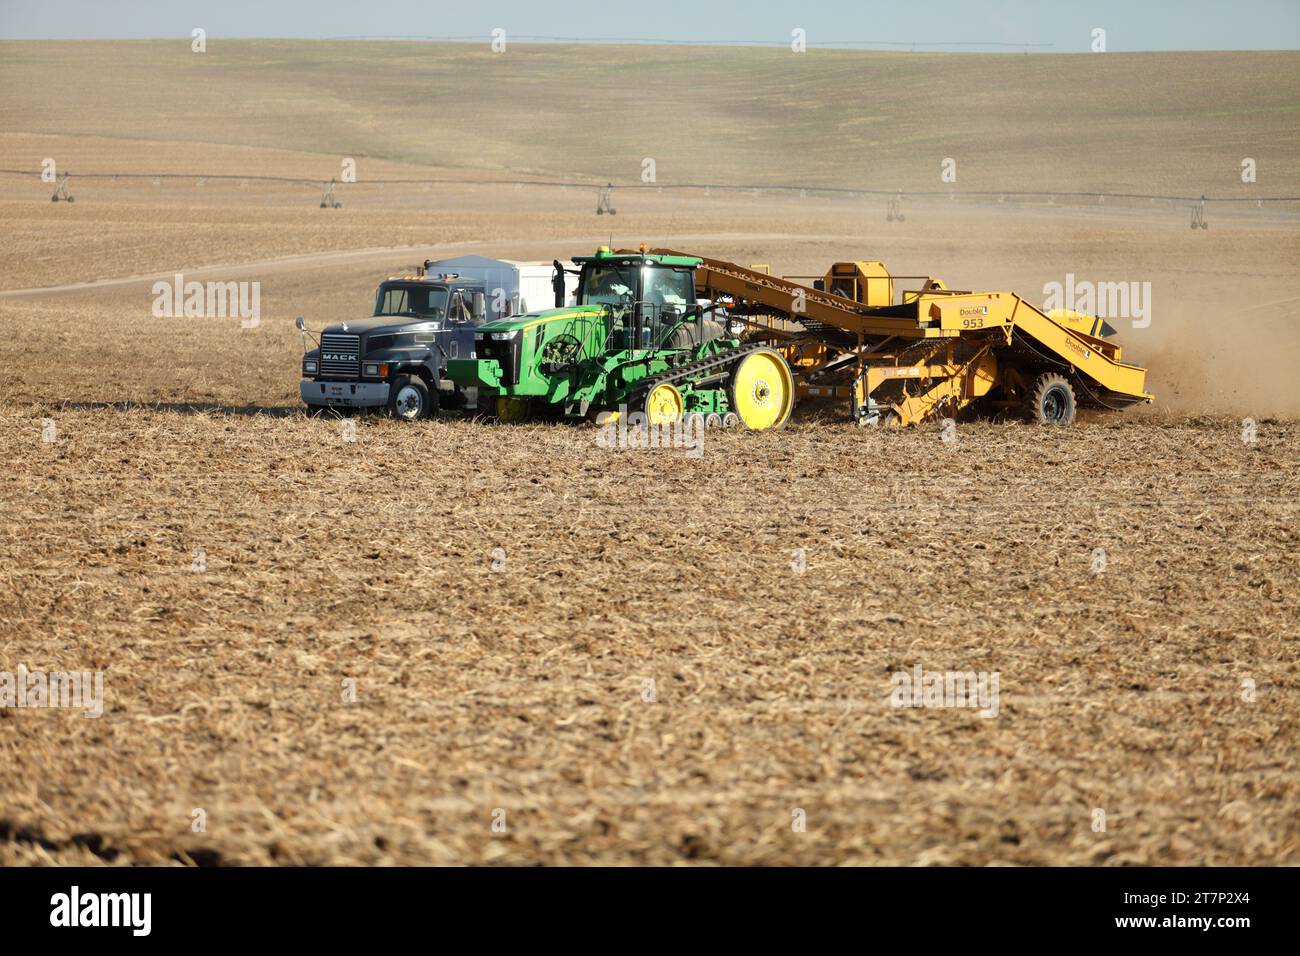 Farmers and field hands use farm machinery harvesting potatoes in the fertile farm fields of Idaho.  The potatoes are dug by a wind rower, and gently Stock Photo